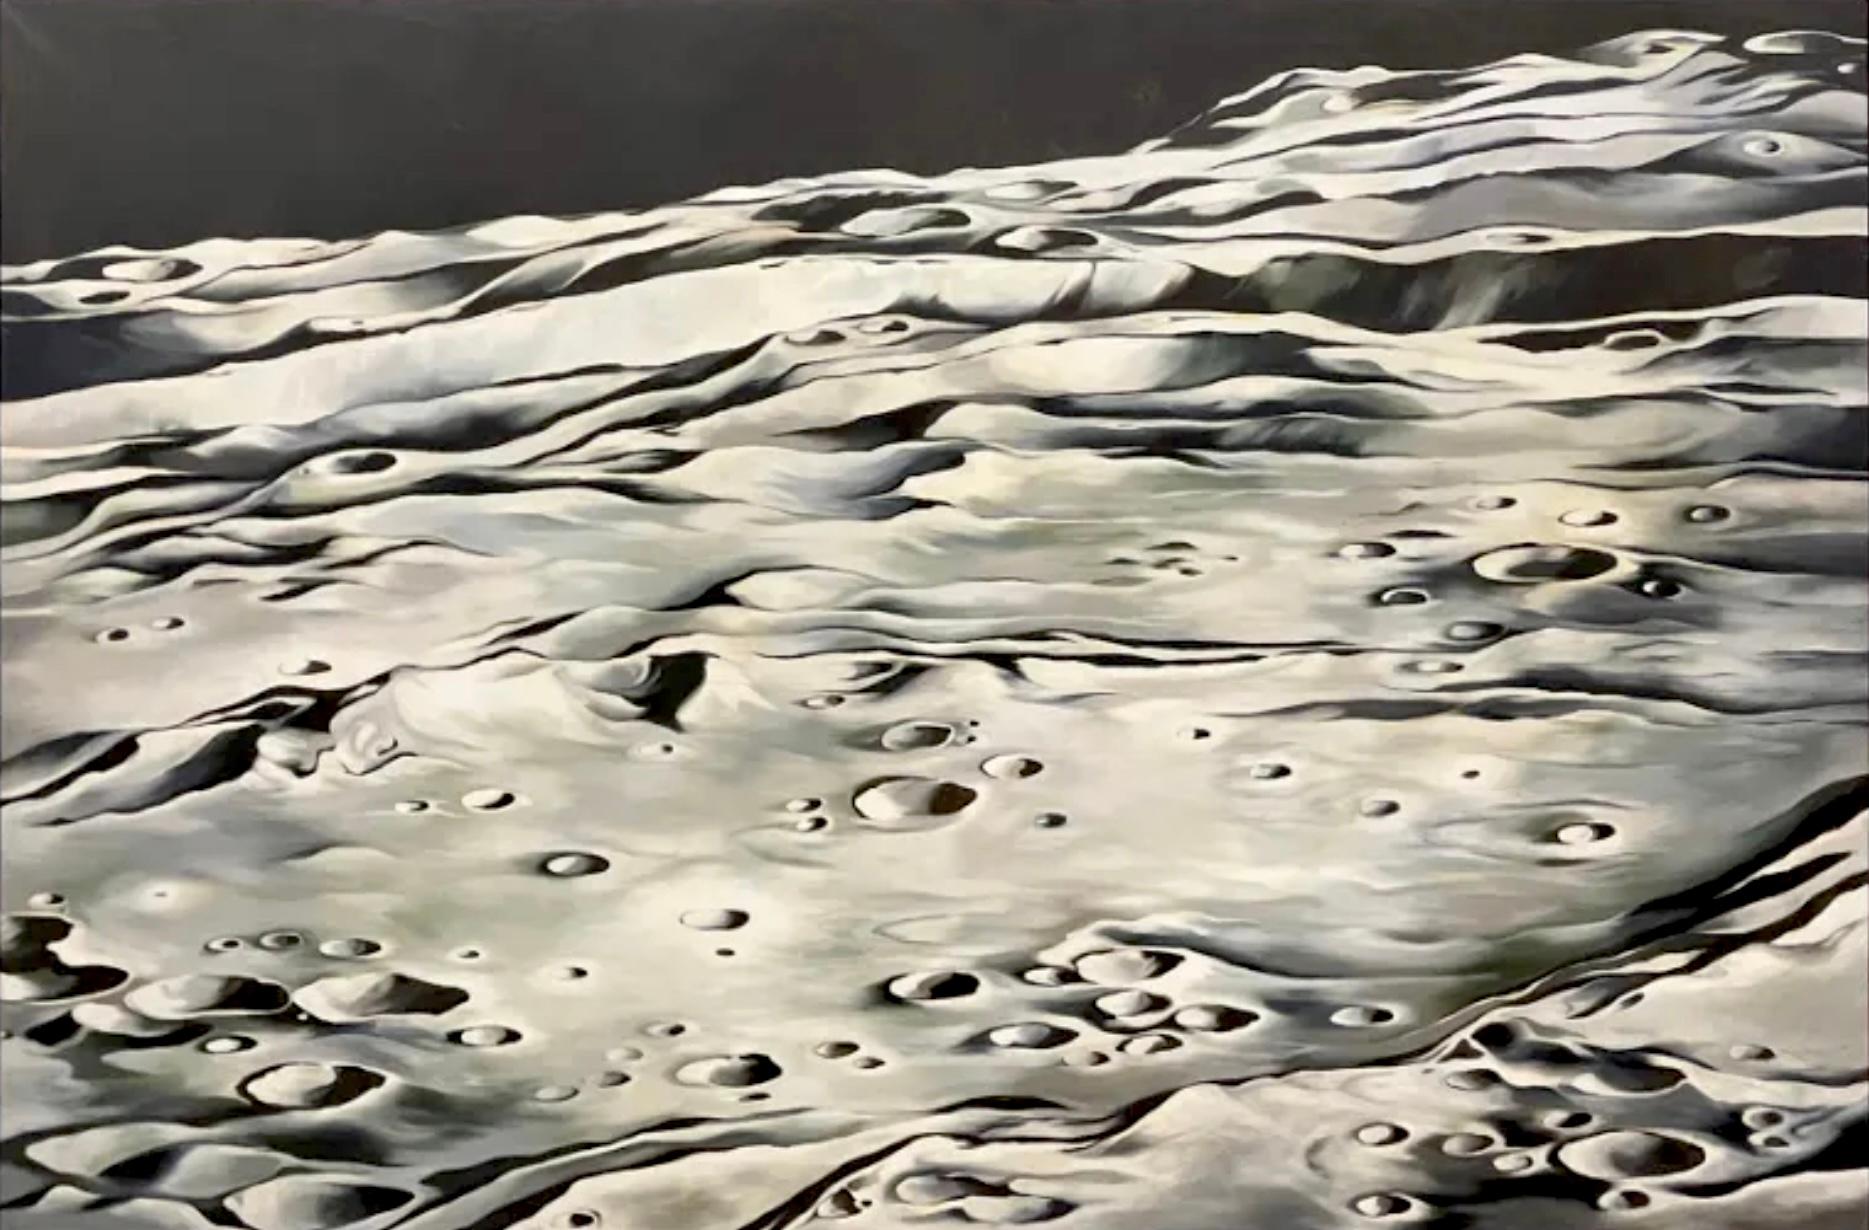 Original oil painting on canvas, 1970. Size: 72 x 108 inches. Signed, titled, dated on verso. Provenance: Andrew Crispo Gallery, New York, NY. Notes: This is one of the resulting lunar paintings from Lowell Nesbitt’s commission as the official